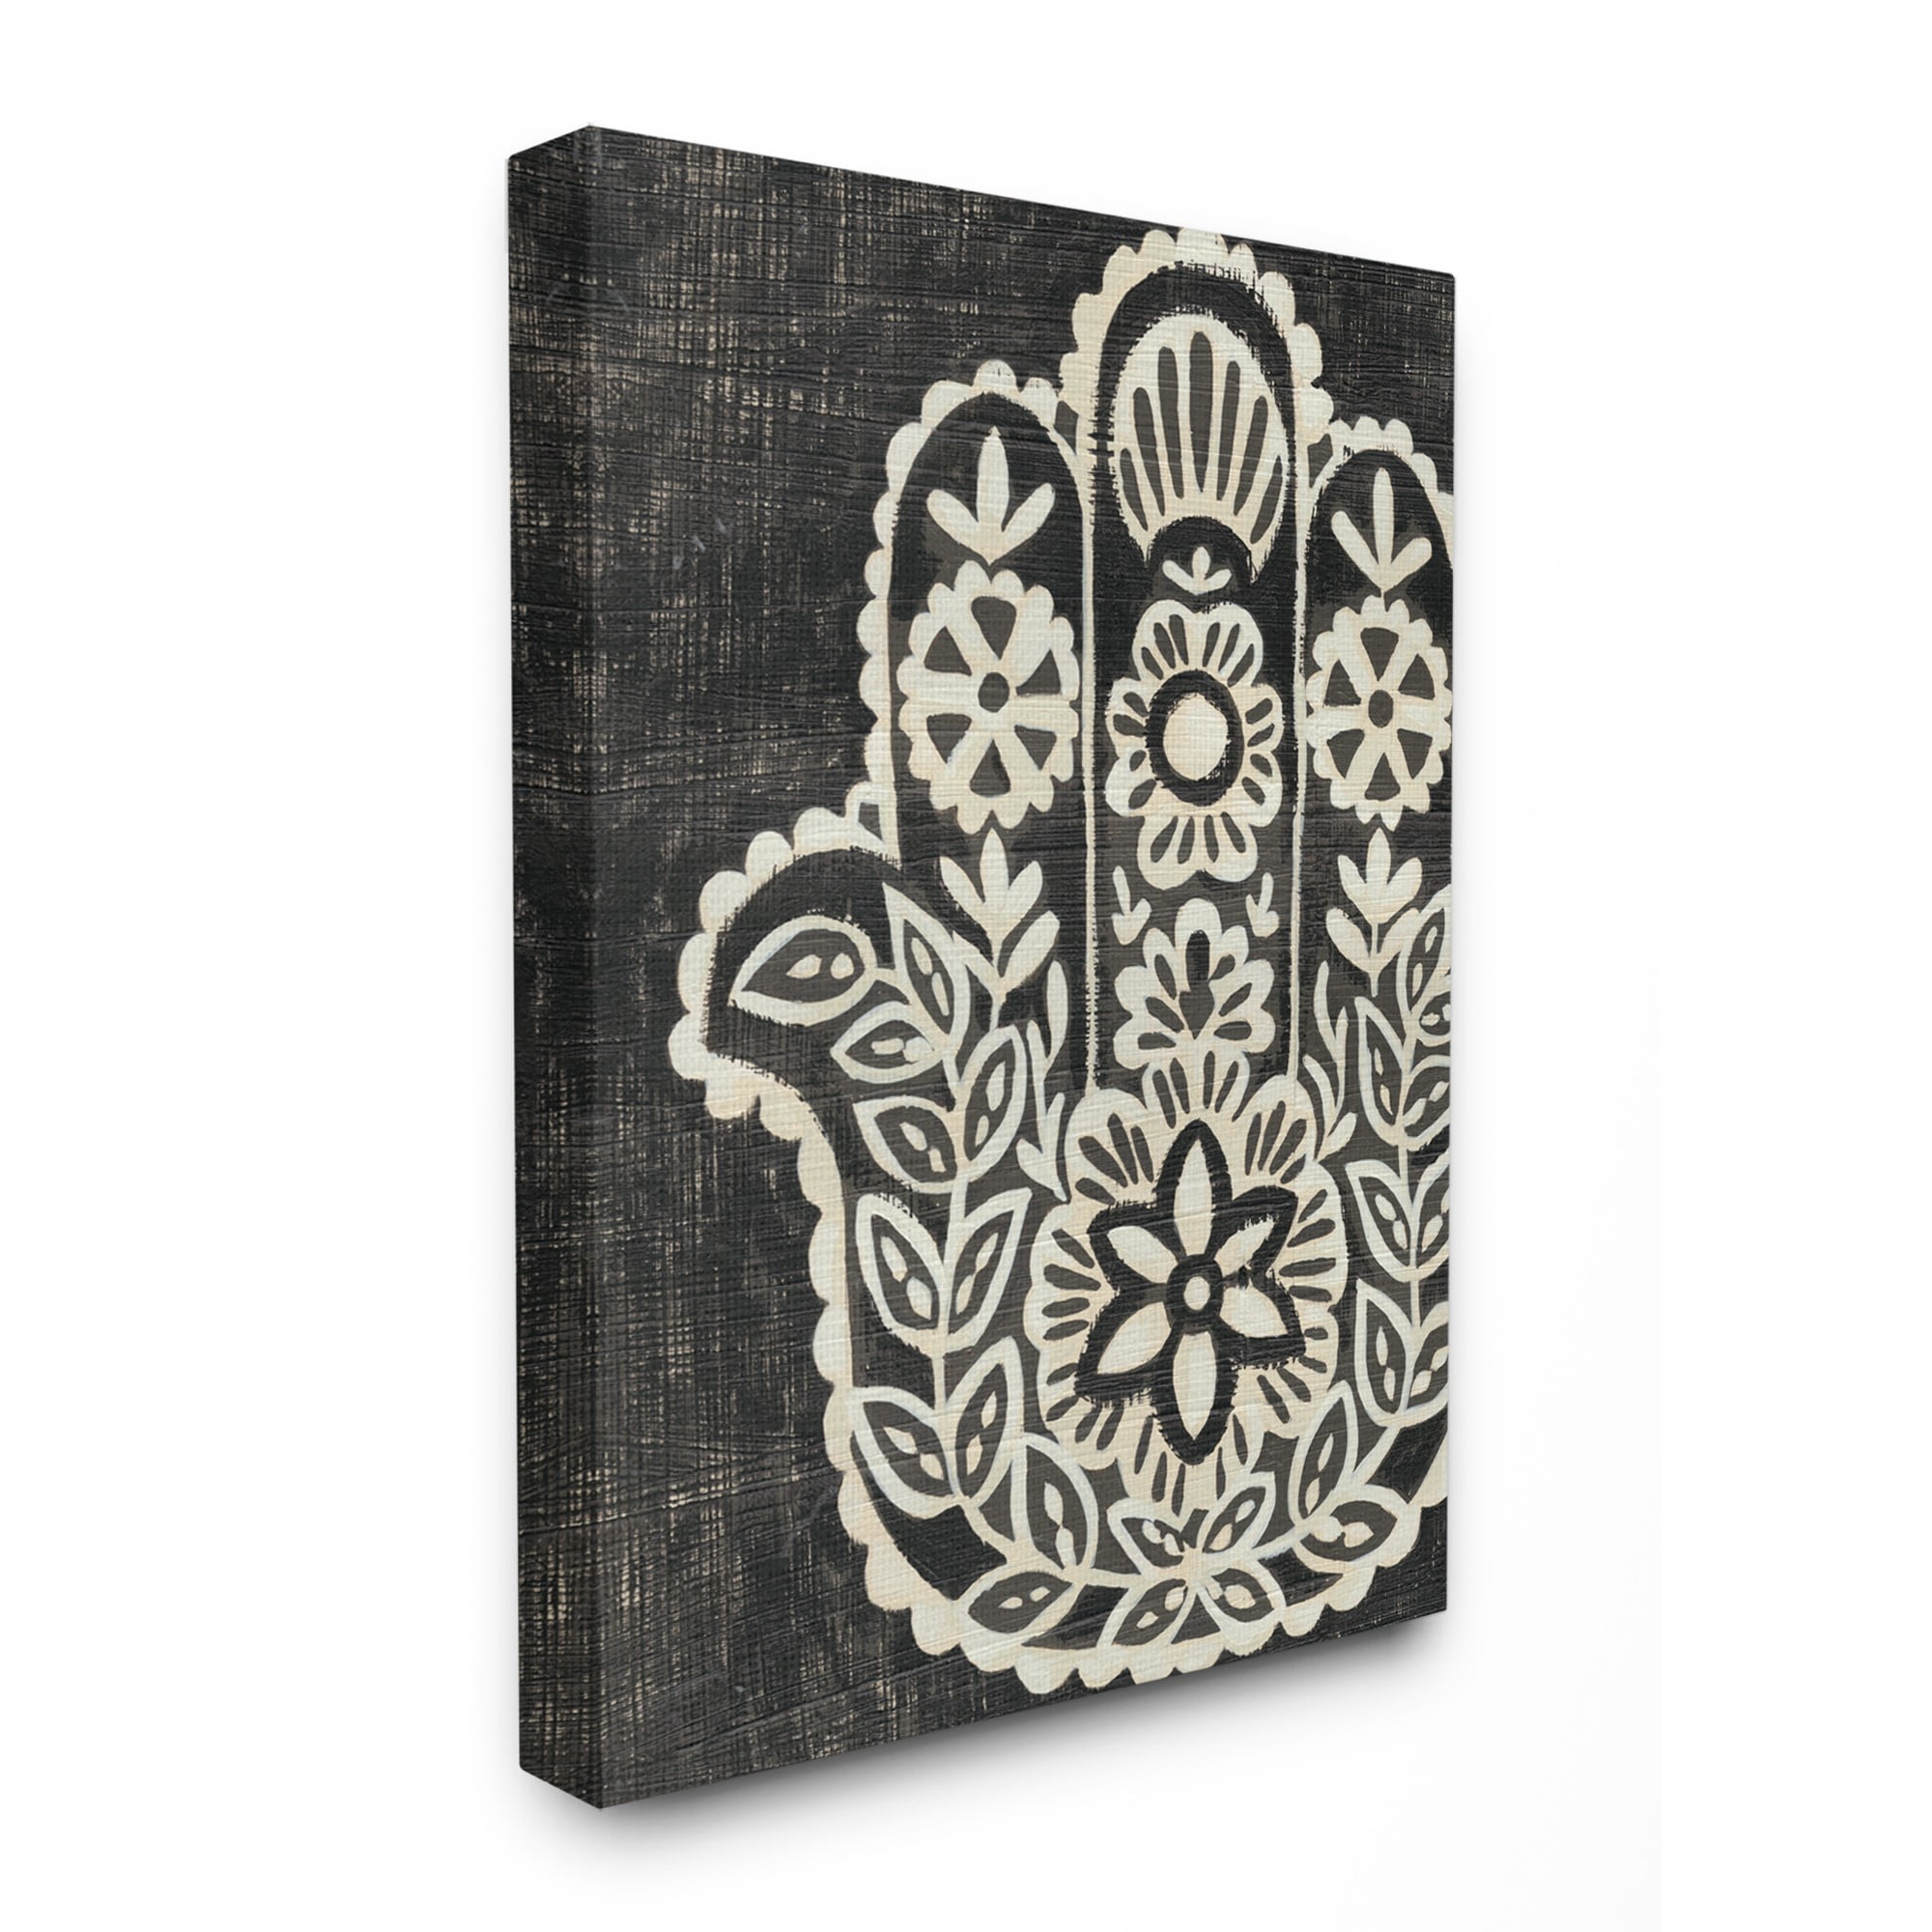 The Stupell Home Decor Collection Floral Pattern Black and White Hamsa ...